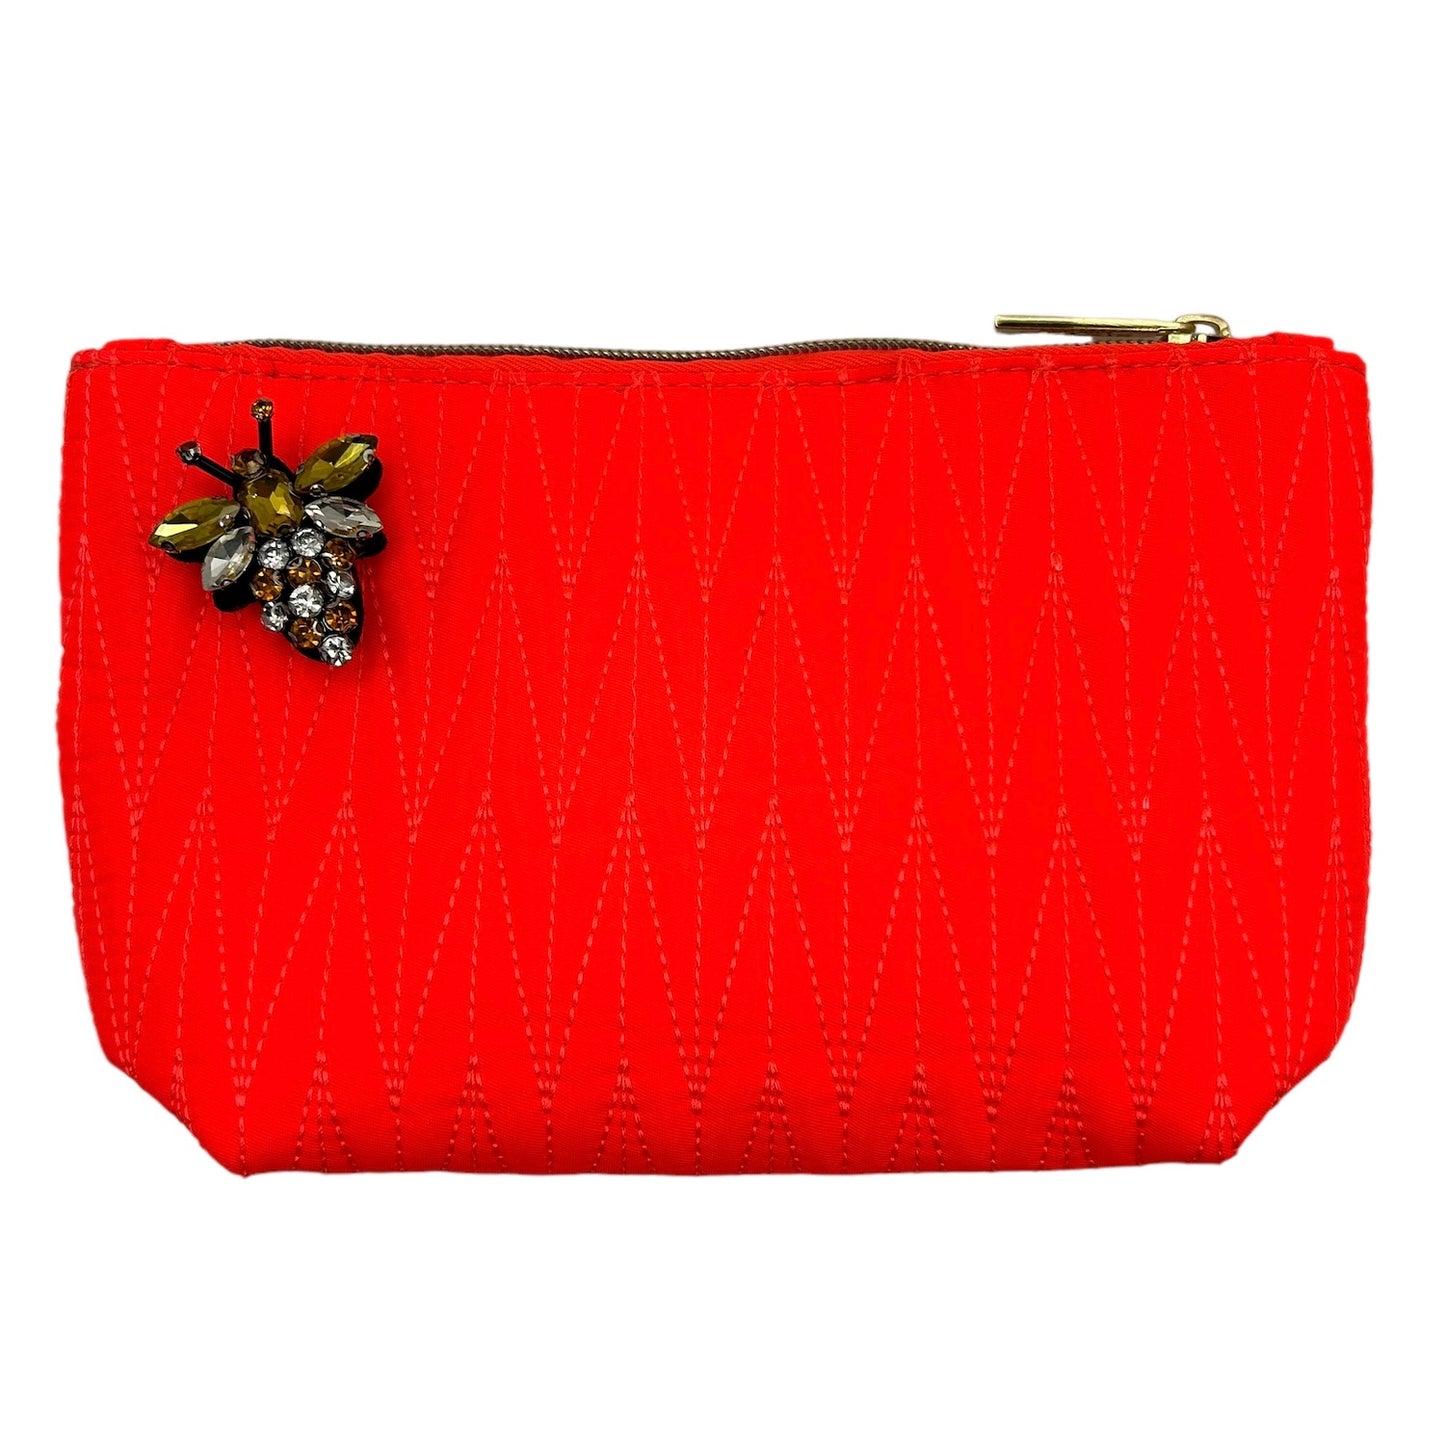 Orange Tribeca make up bag with a queen bee pin